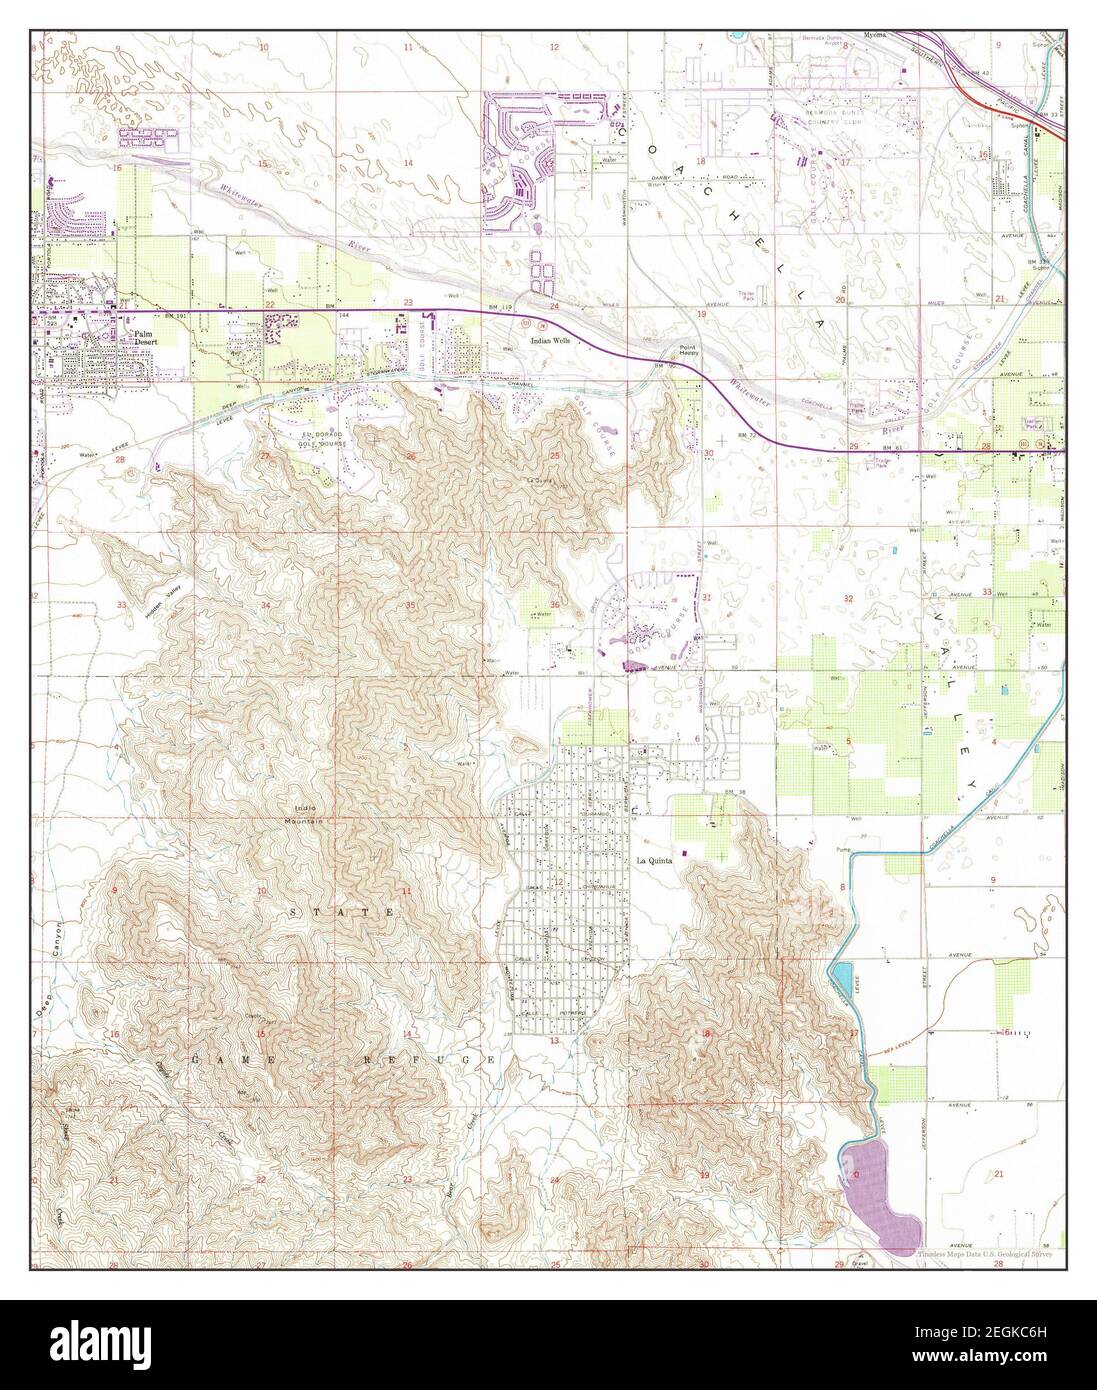 La Quinta, California, map 1959, 1:24000, United States of America by Timeless Maps, data U.S. Geological Survey Stock Photo